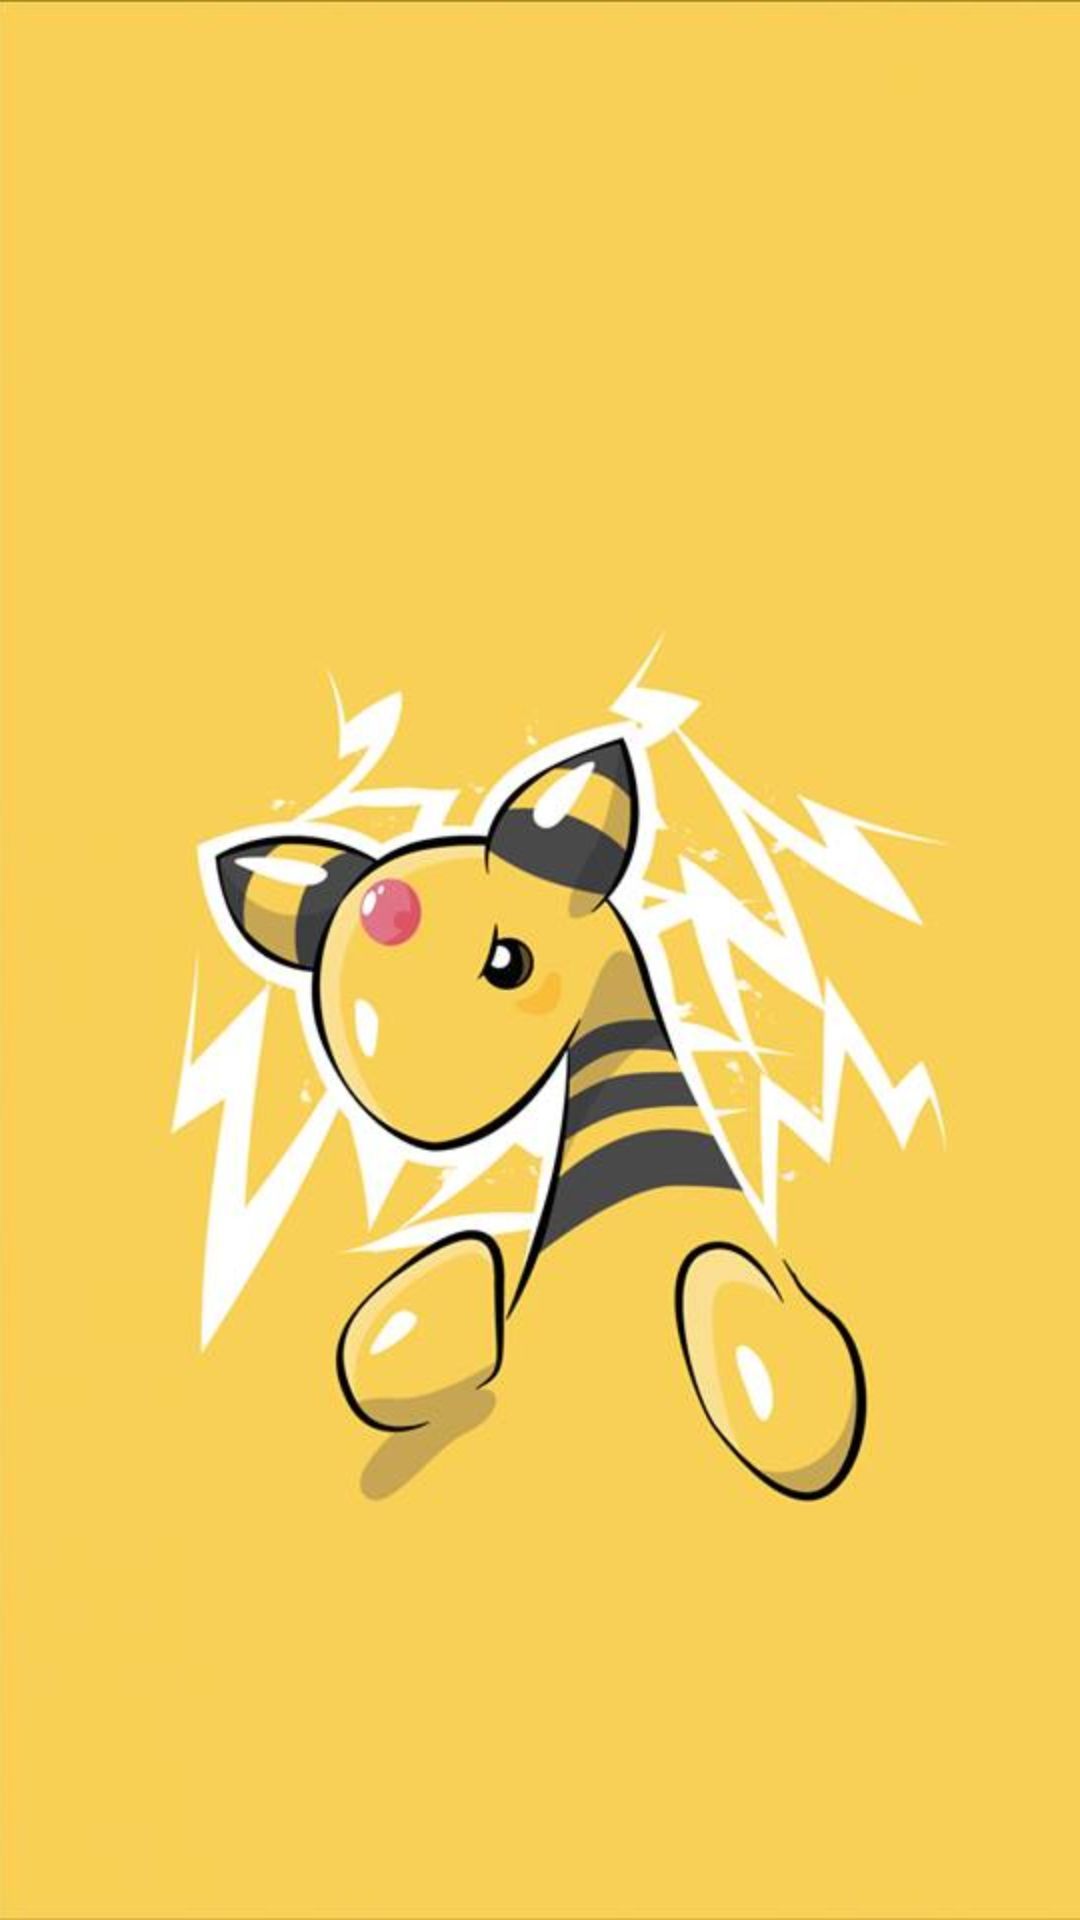 Ampharos Tap To See More Pokemon Go Wallpaper Mobile9 Cute